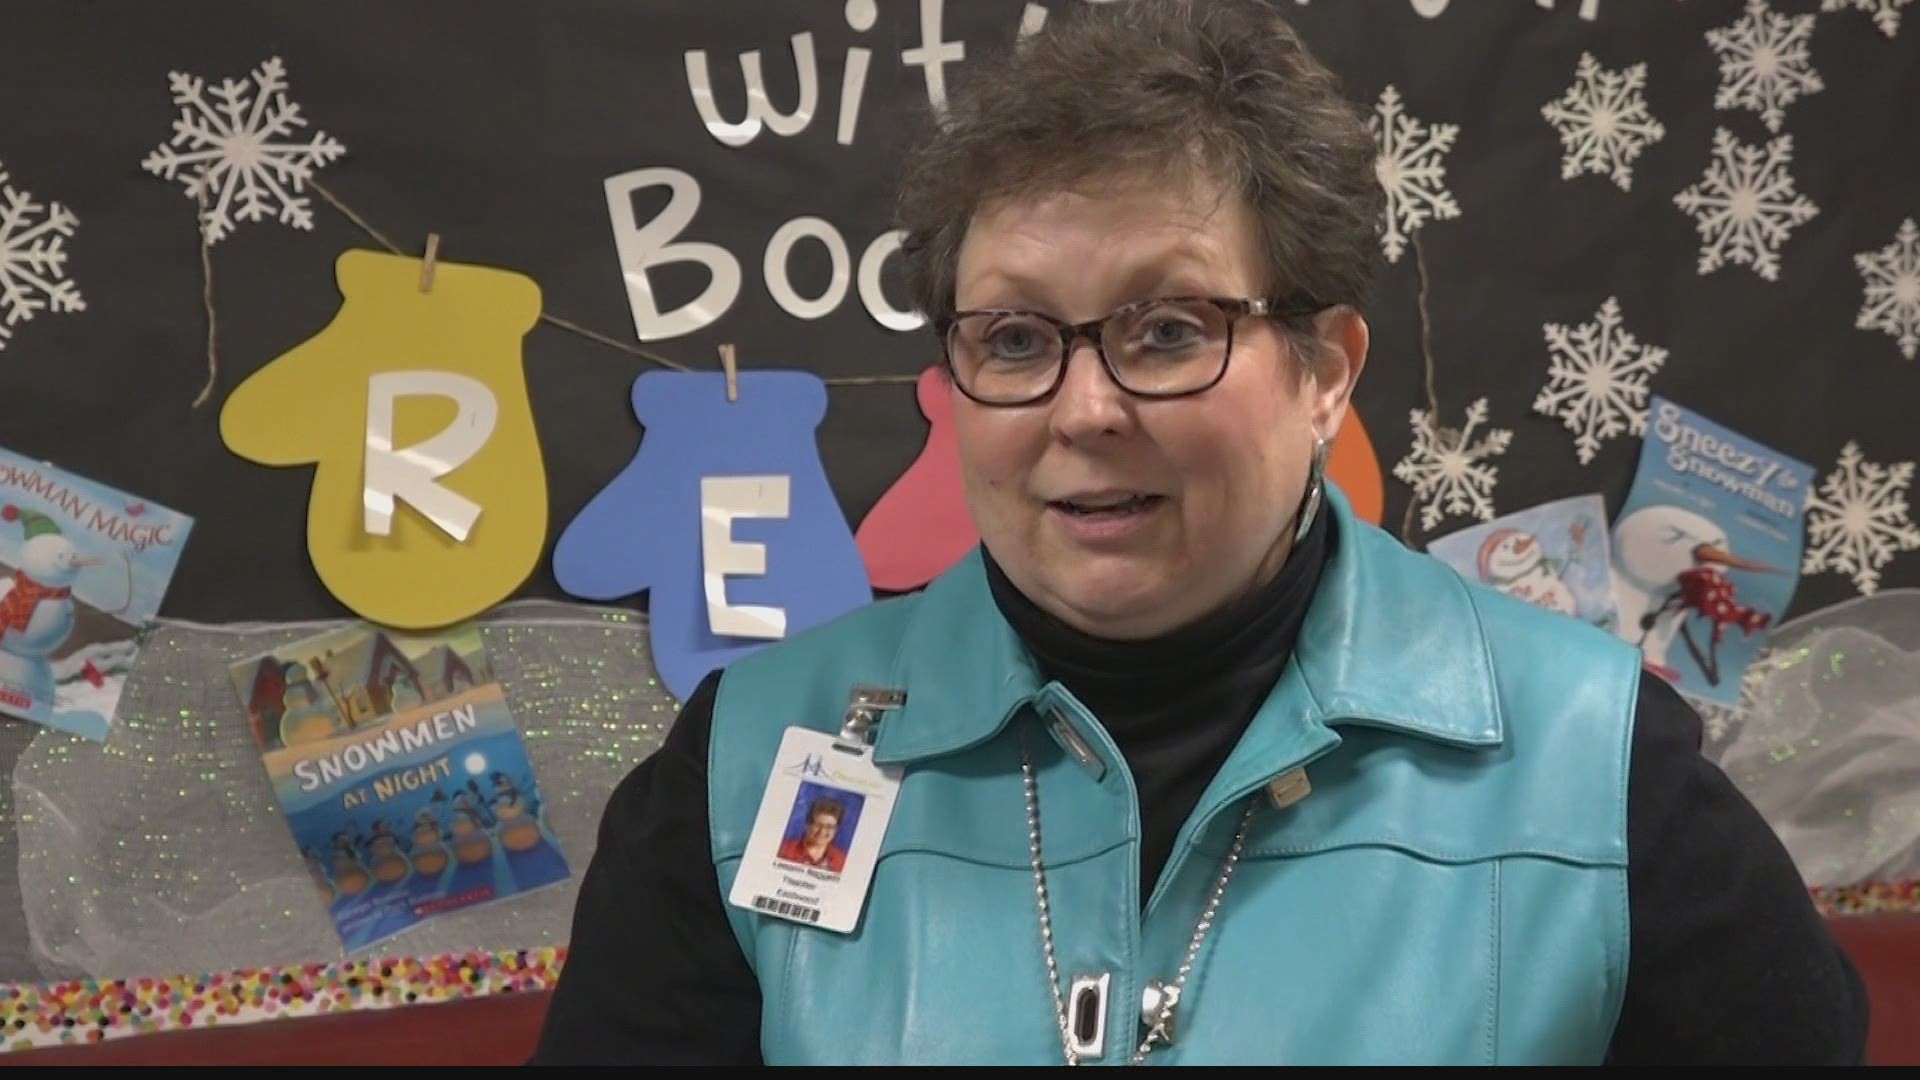 Mrs. Leeann Baggett has taught elementary school in Decatur for 32 years.